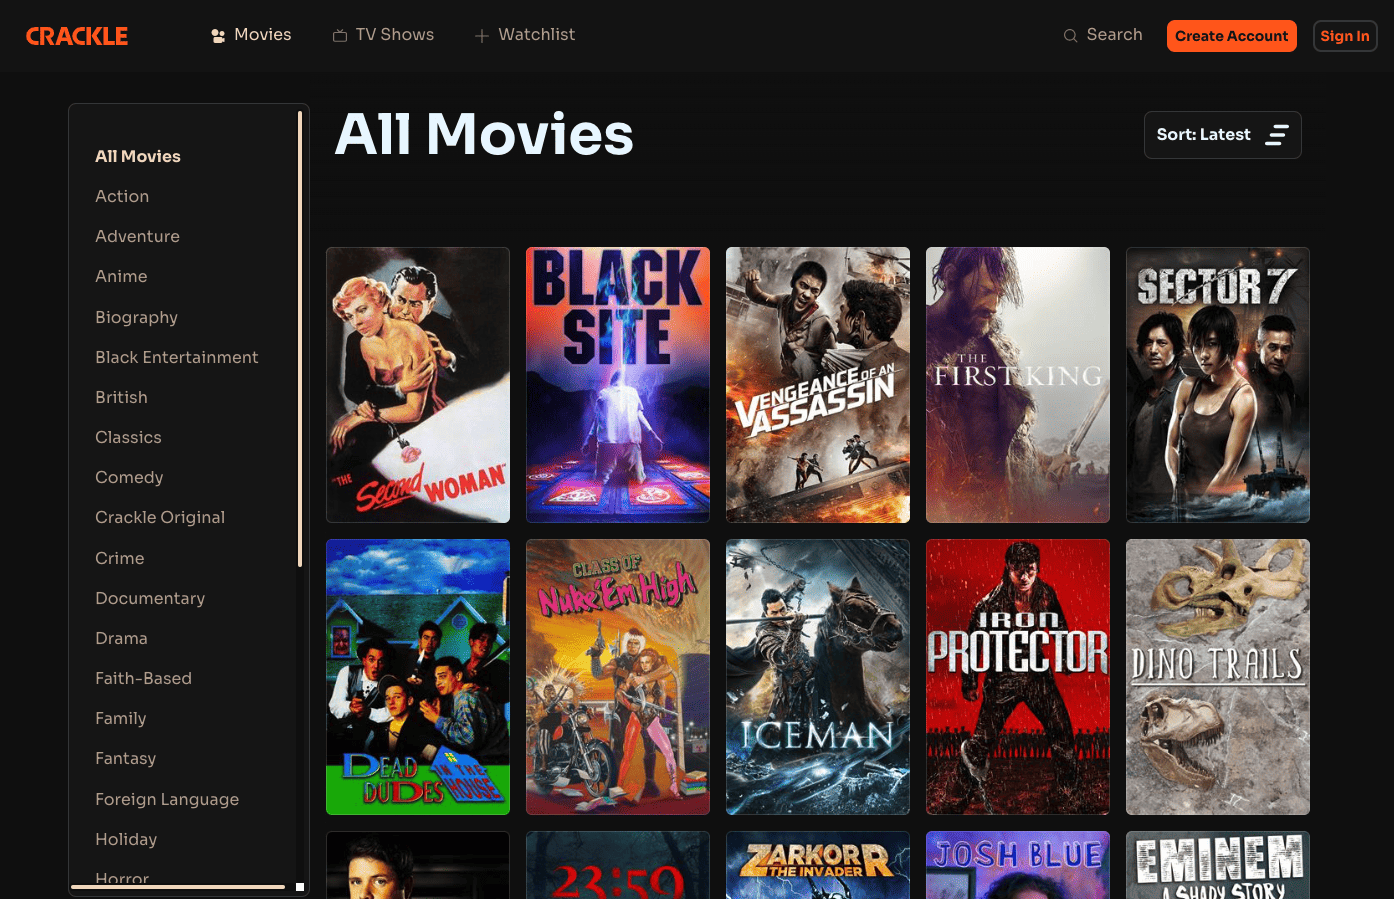 Browsing Crackle’s movie selection in the service’s web app